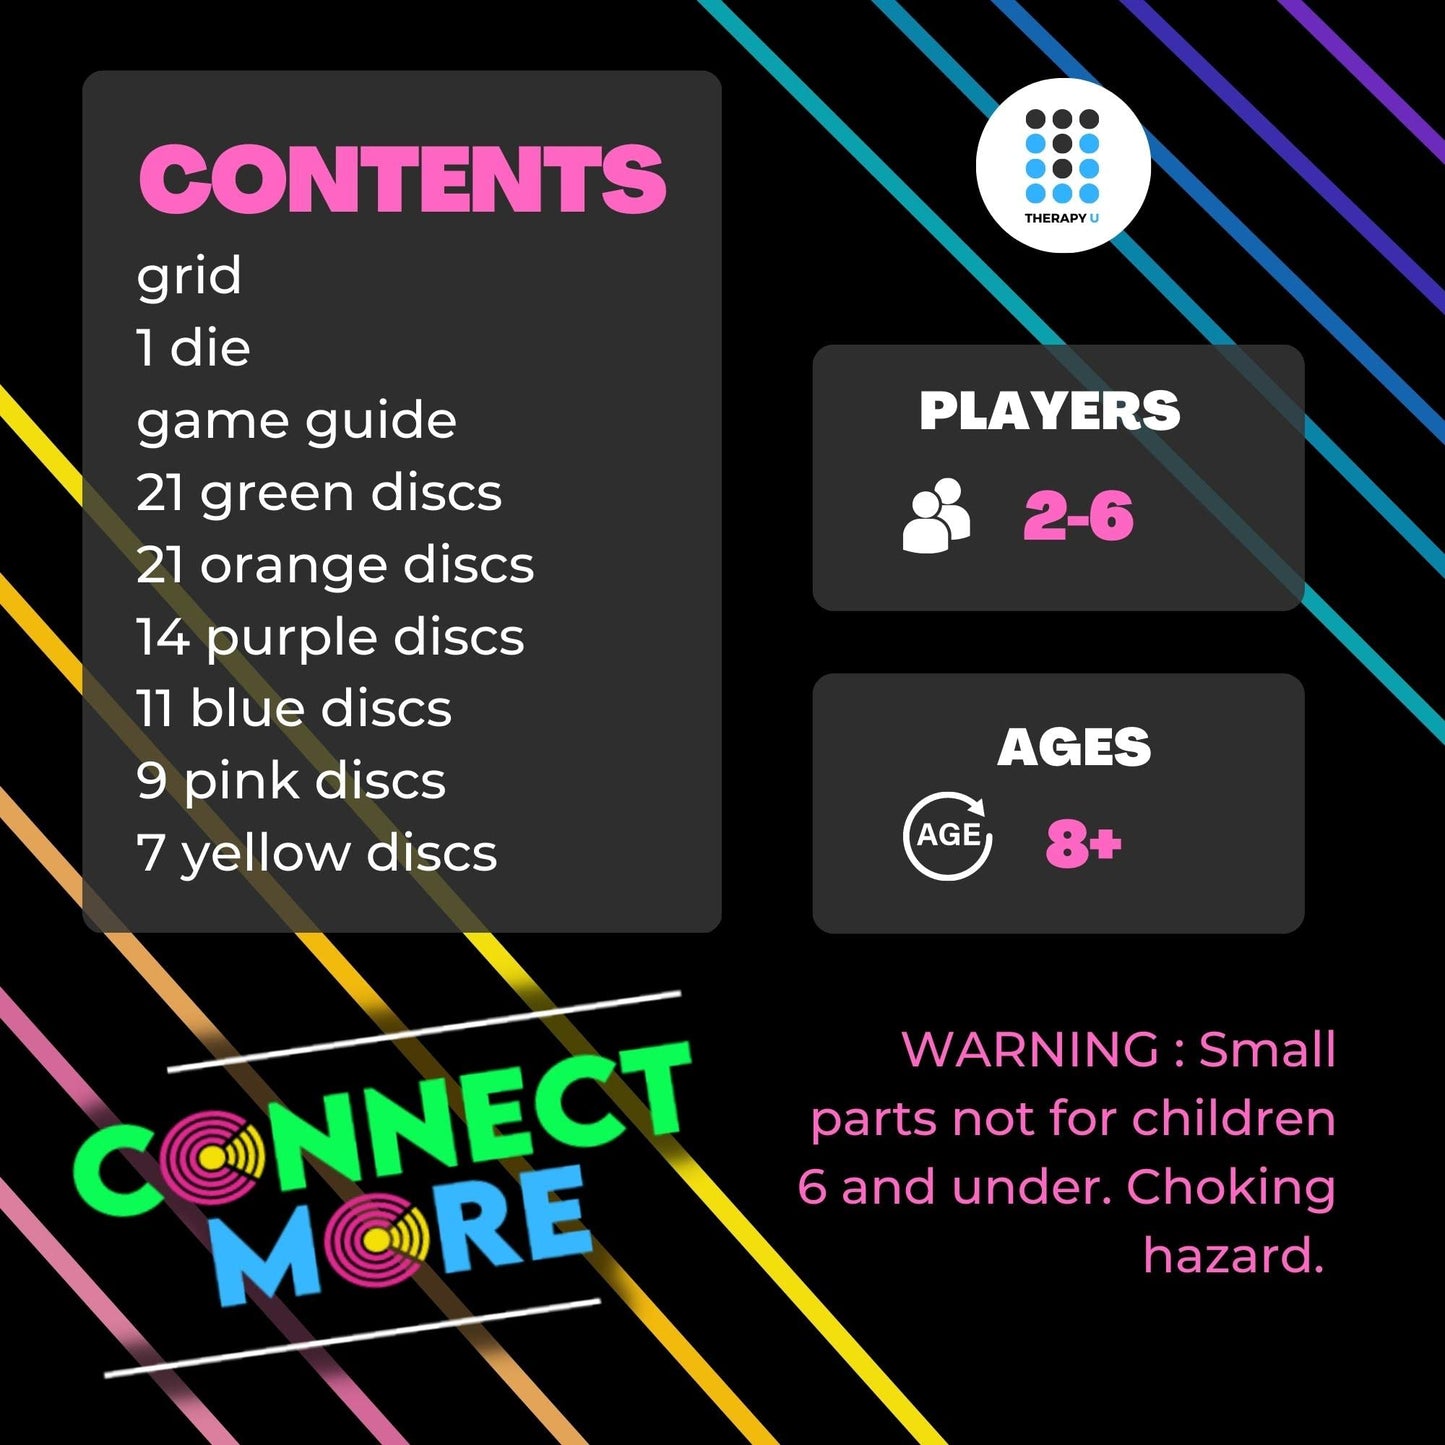 Connect More - Social Skills Games and Therapy Games, Multiplayer up to 6 Players, 4 in a Row Connect Game Fostering Conversation and Relationship Building